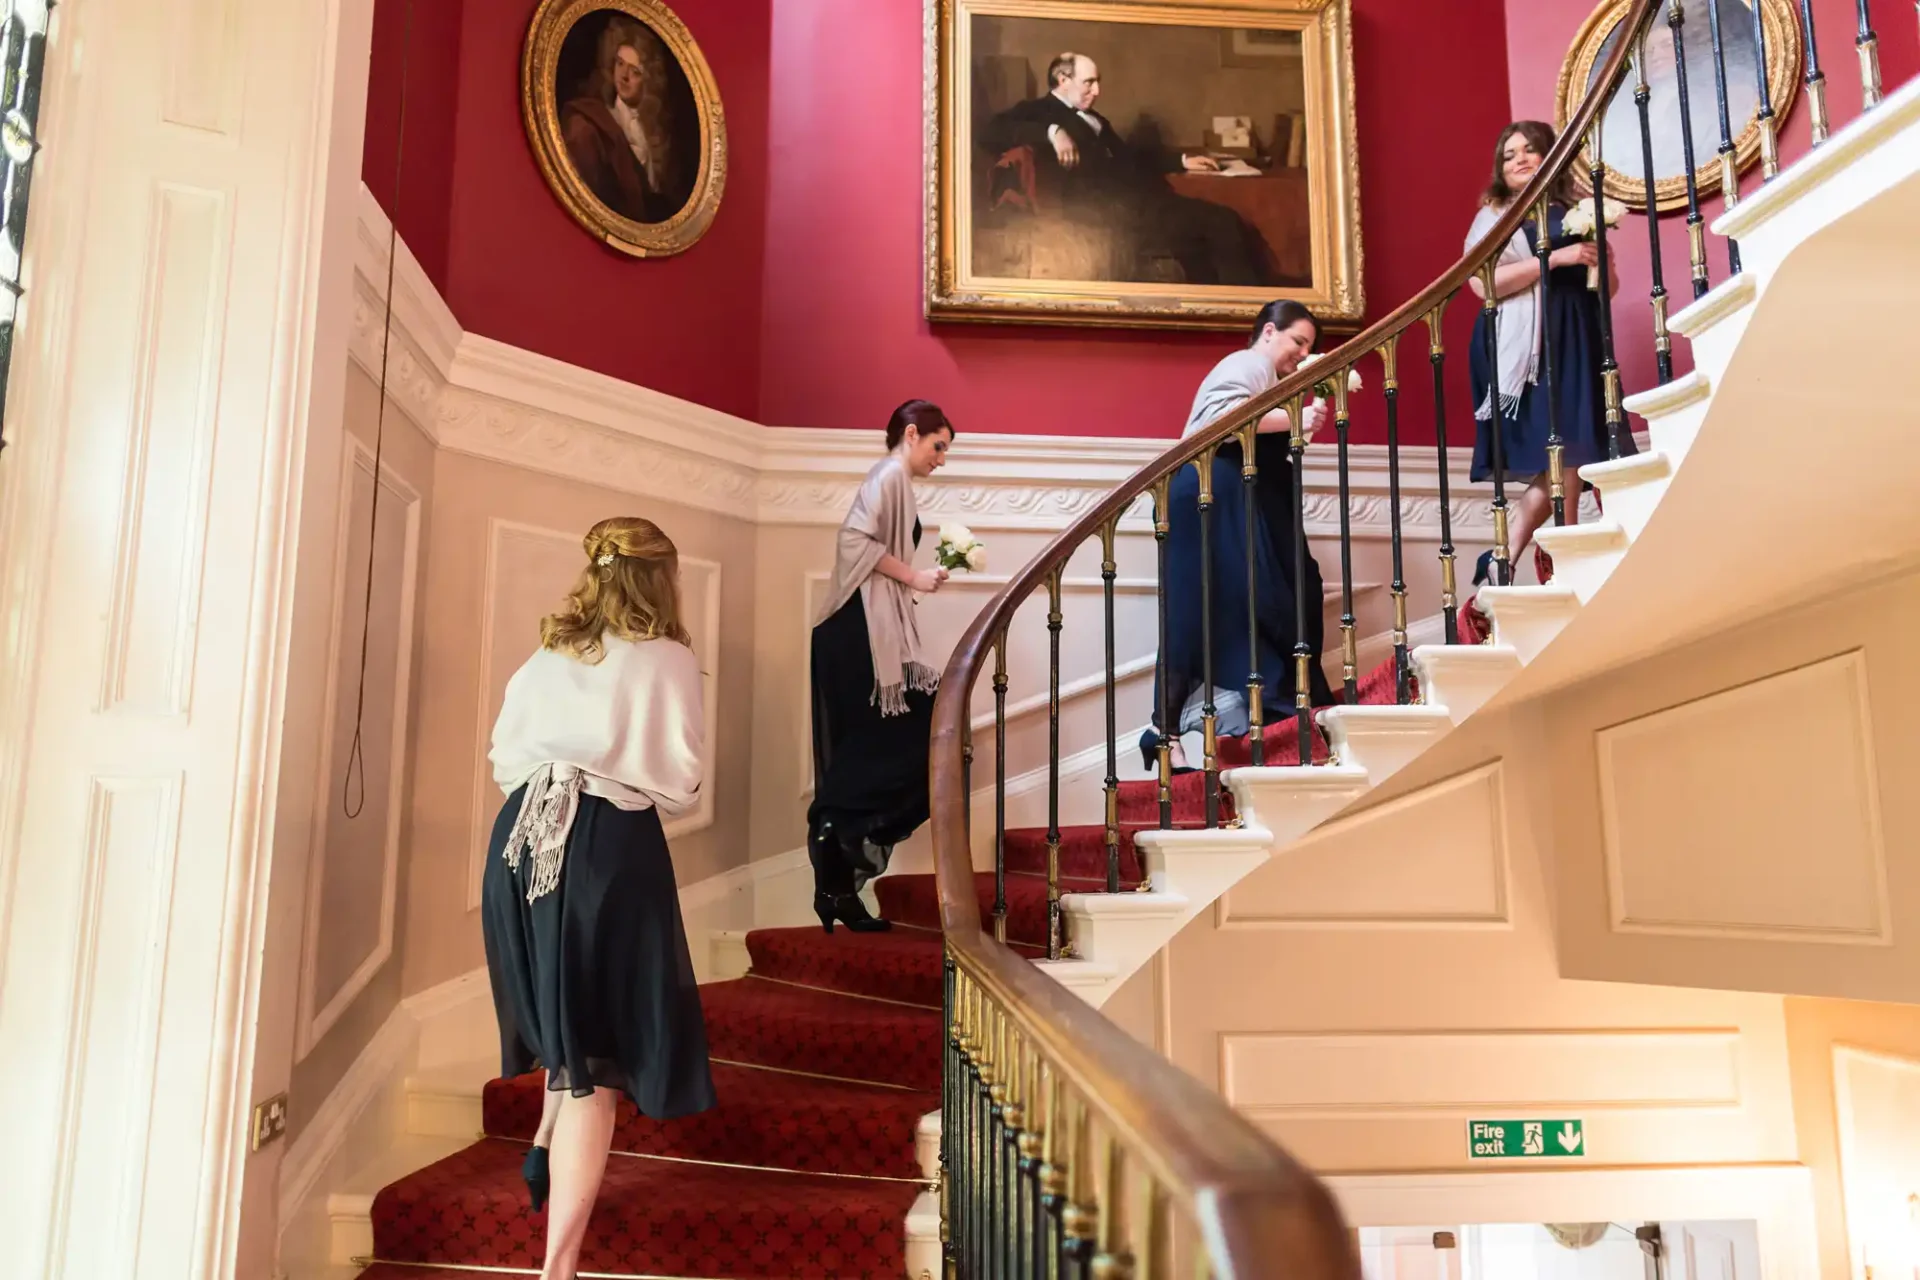 People ascending and descending a grand staircase with red carpet in an elegant room with pink walls and portraits.